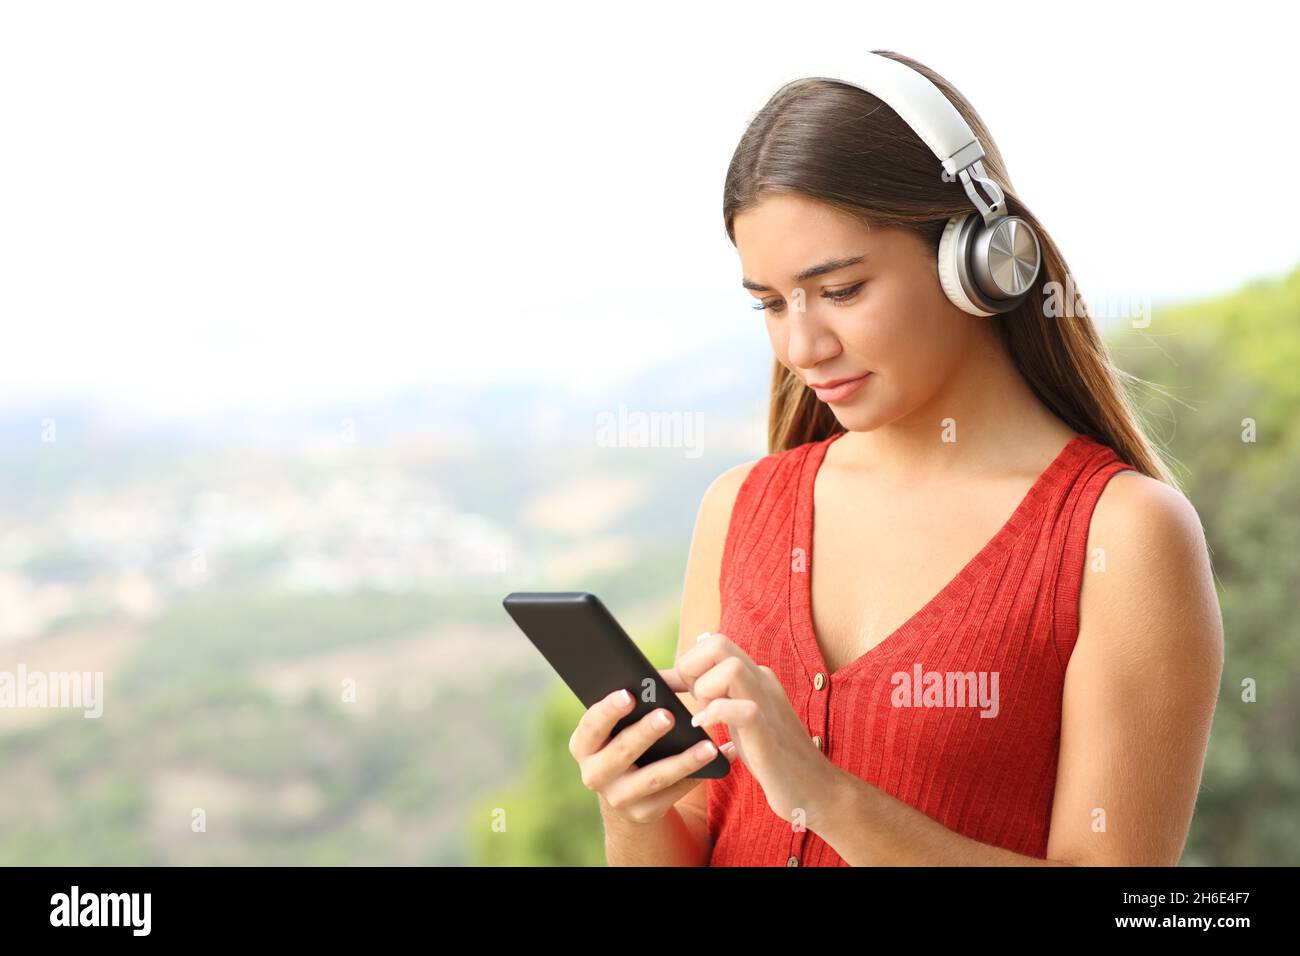 Teenager in red wearing headphones listening to music checking phone outdoors Stock Photo